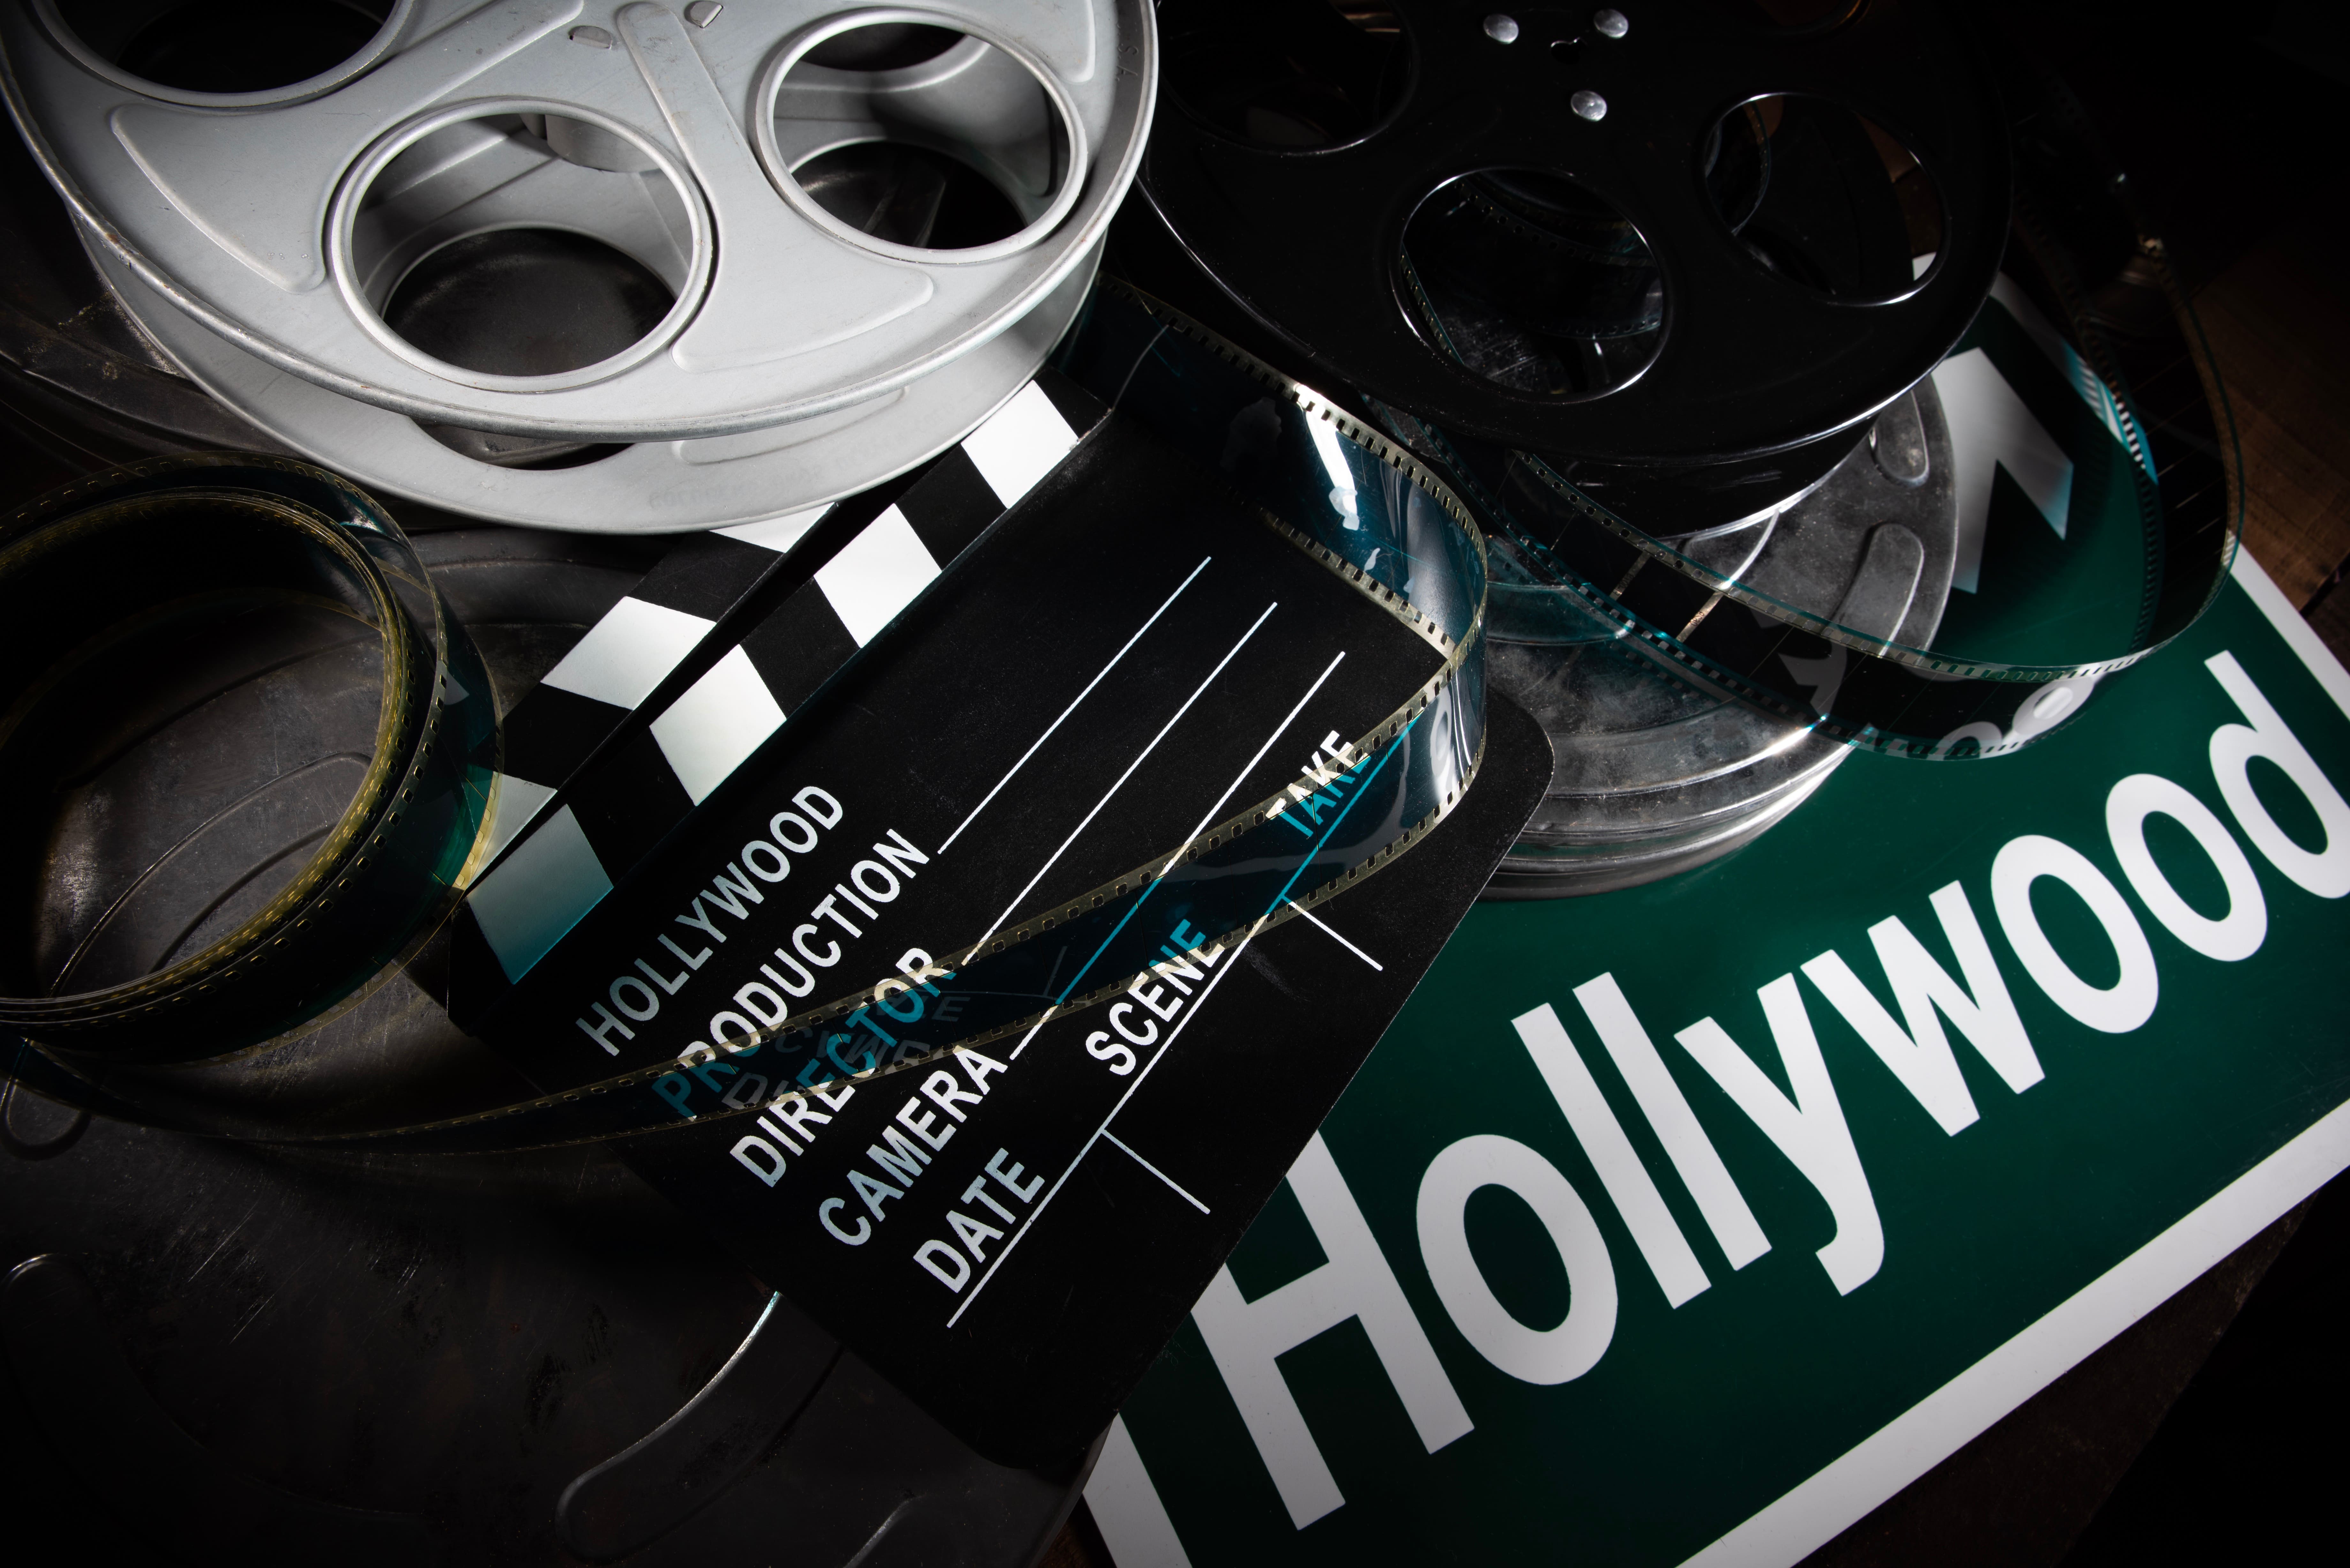 A collection of film reels and cases, a clapper board, and a Hollywood road sign.